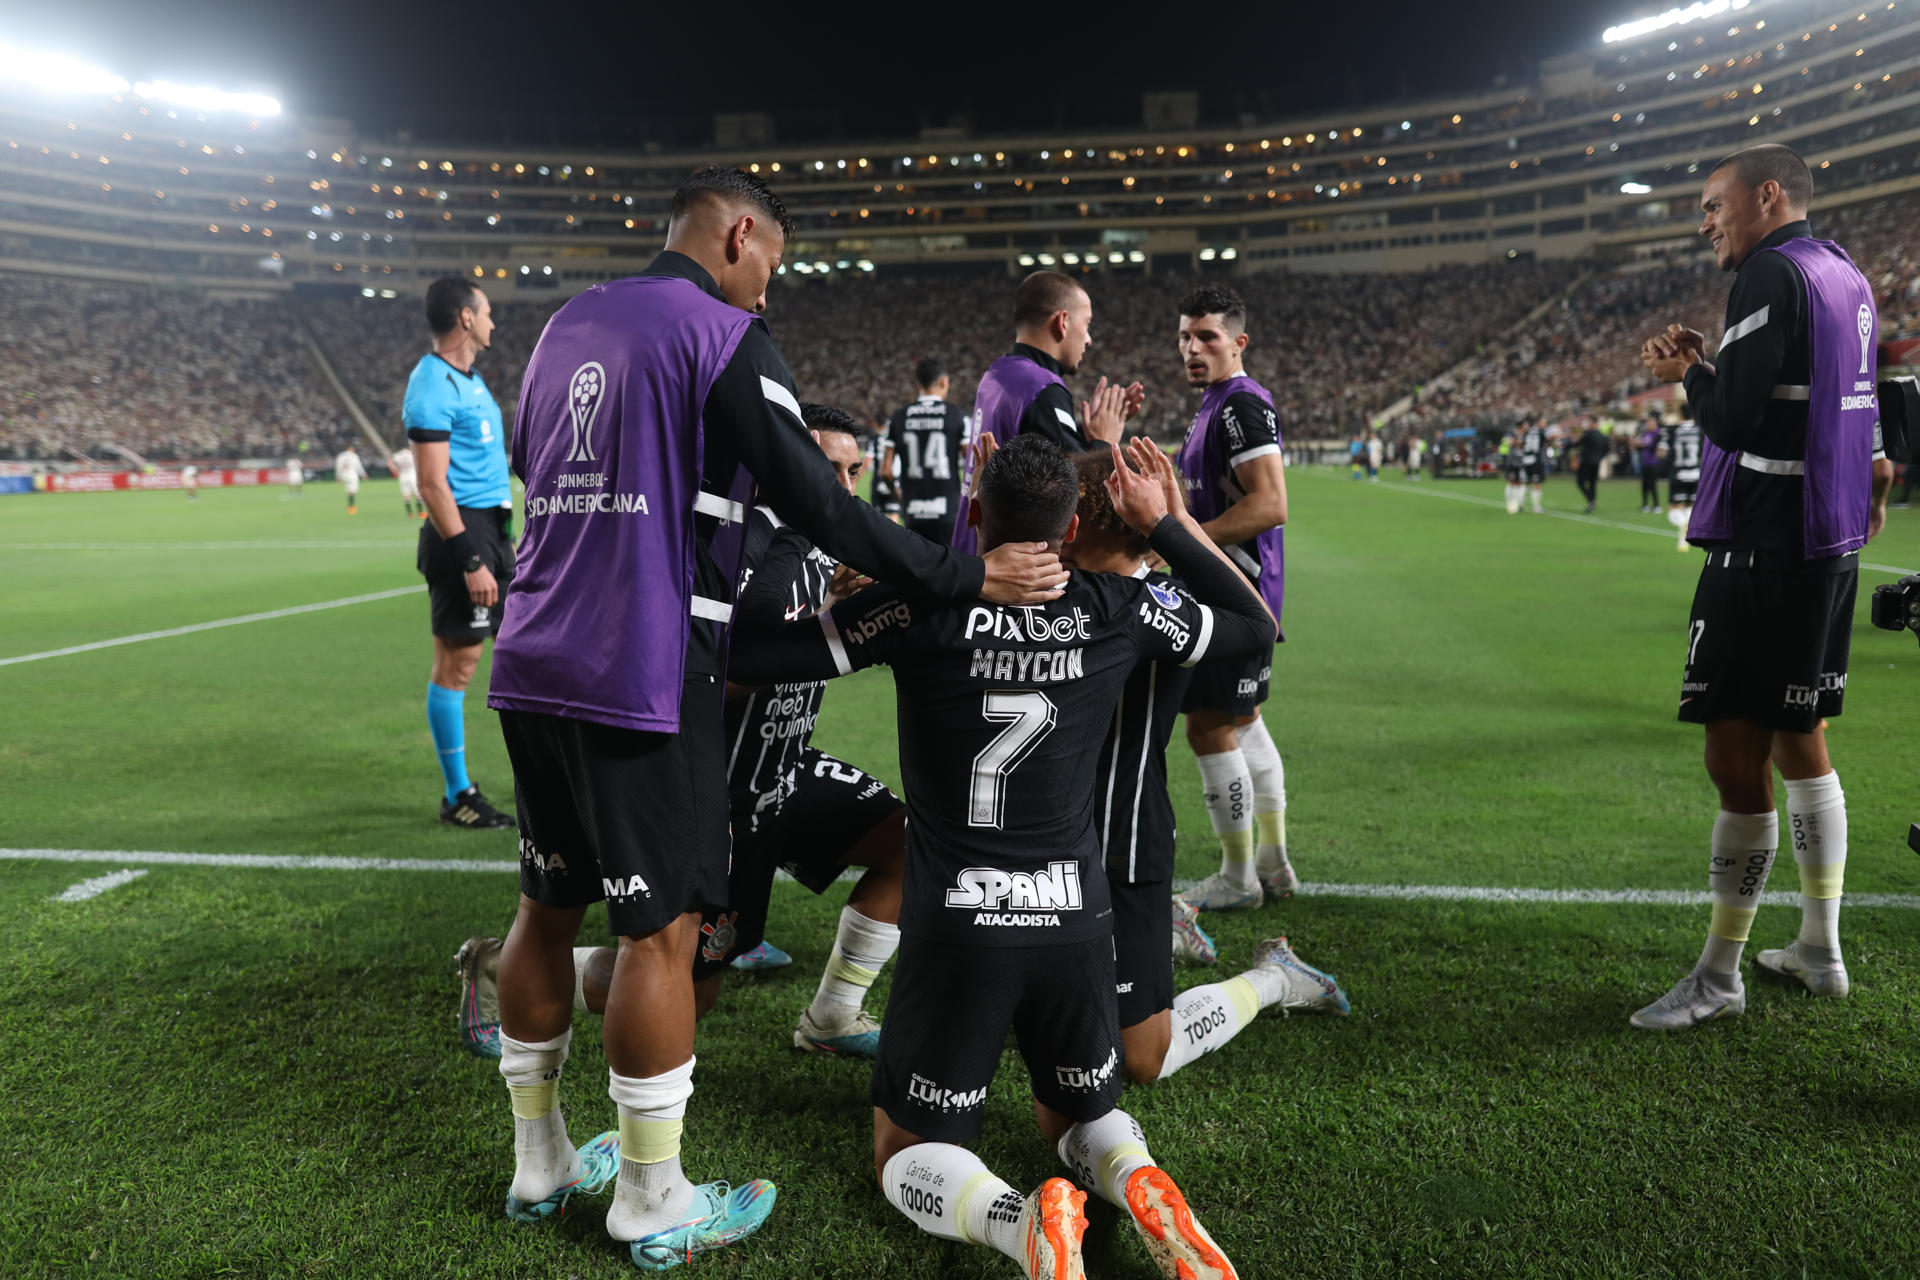 Bolivia's PSG: Always Ready eyeing another Libertadores upset against Boca  after stunning Corinthians